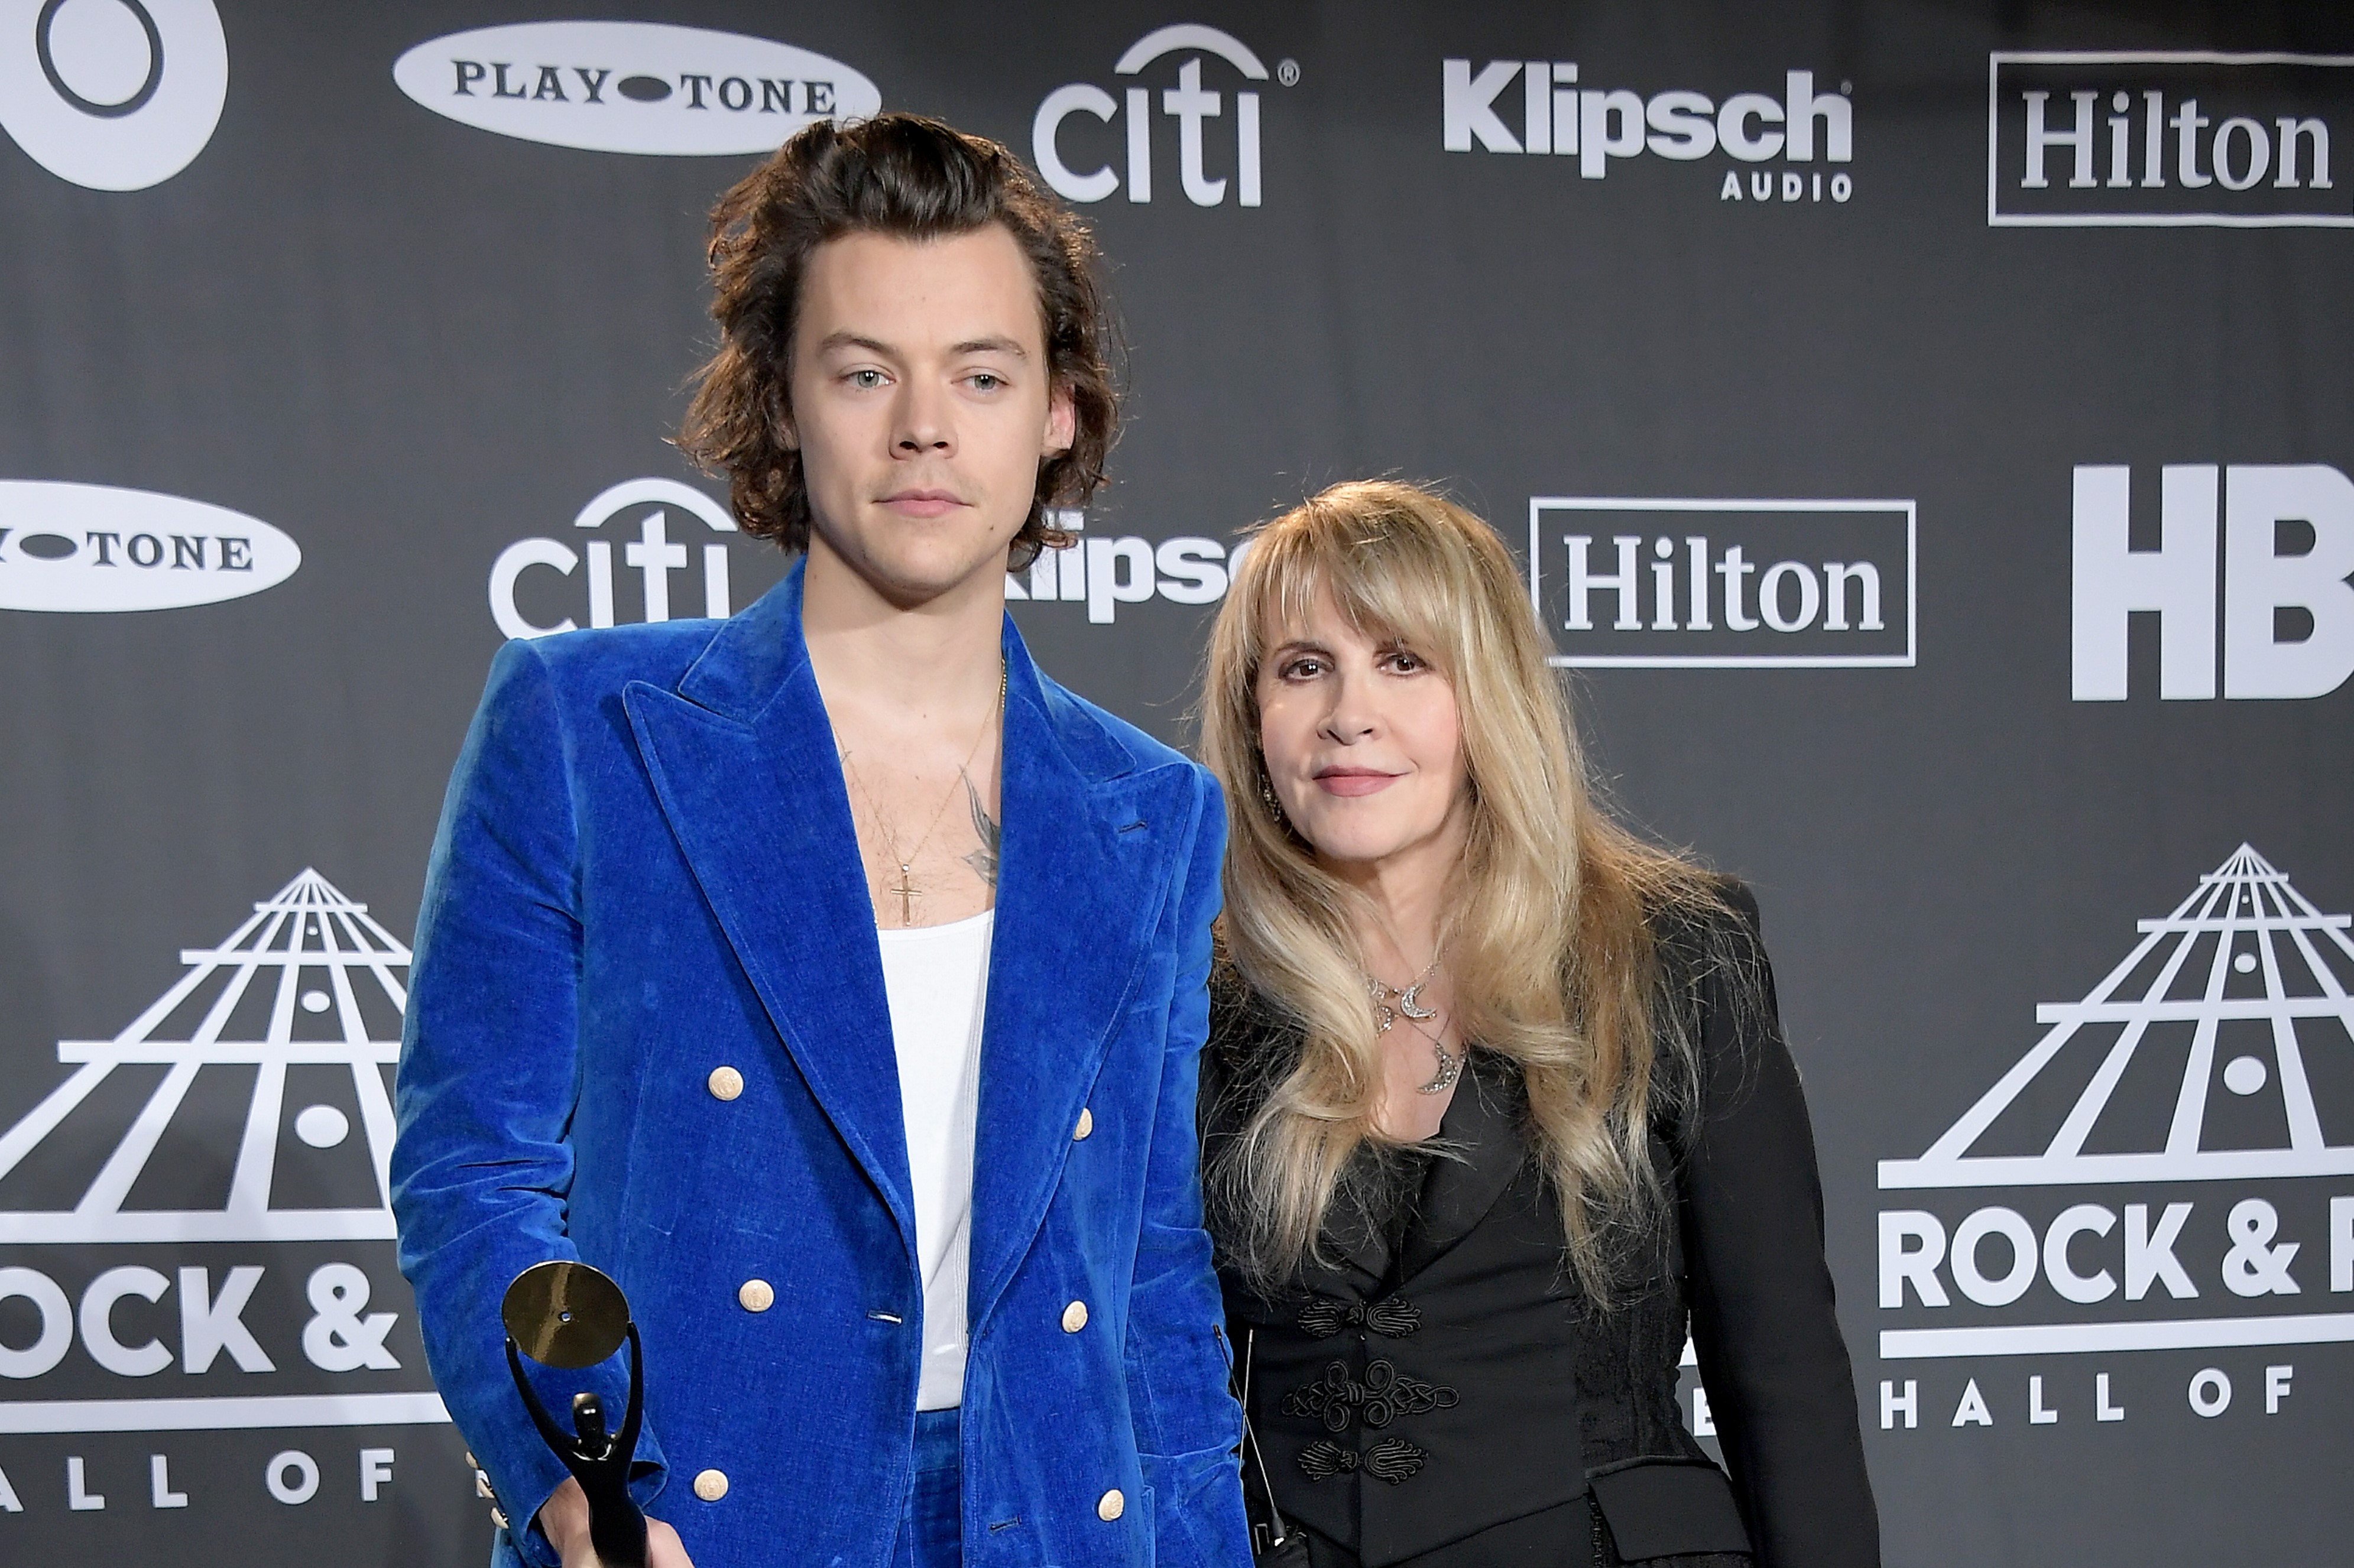 Harry Styles wears blue and Stevie Nicks wear black. They stand shoulder to shoulder.